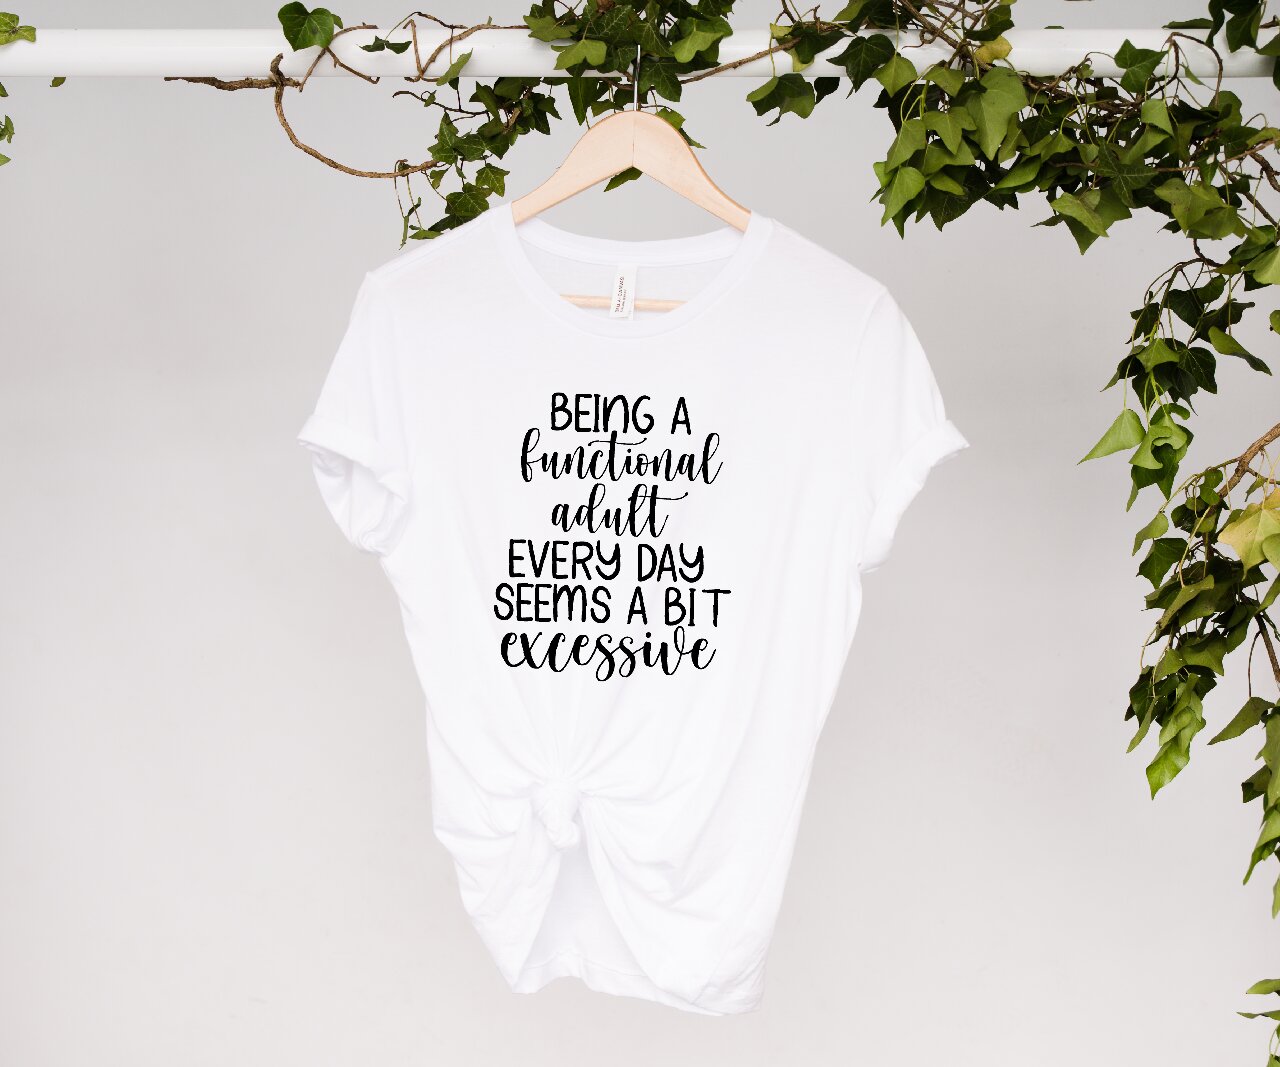 Being A Functional Adult Every Day Seems A Bit Excessive - T-Shirt